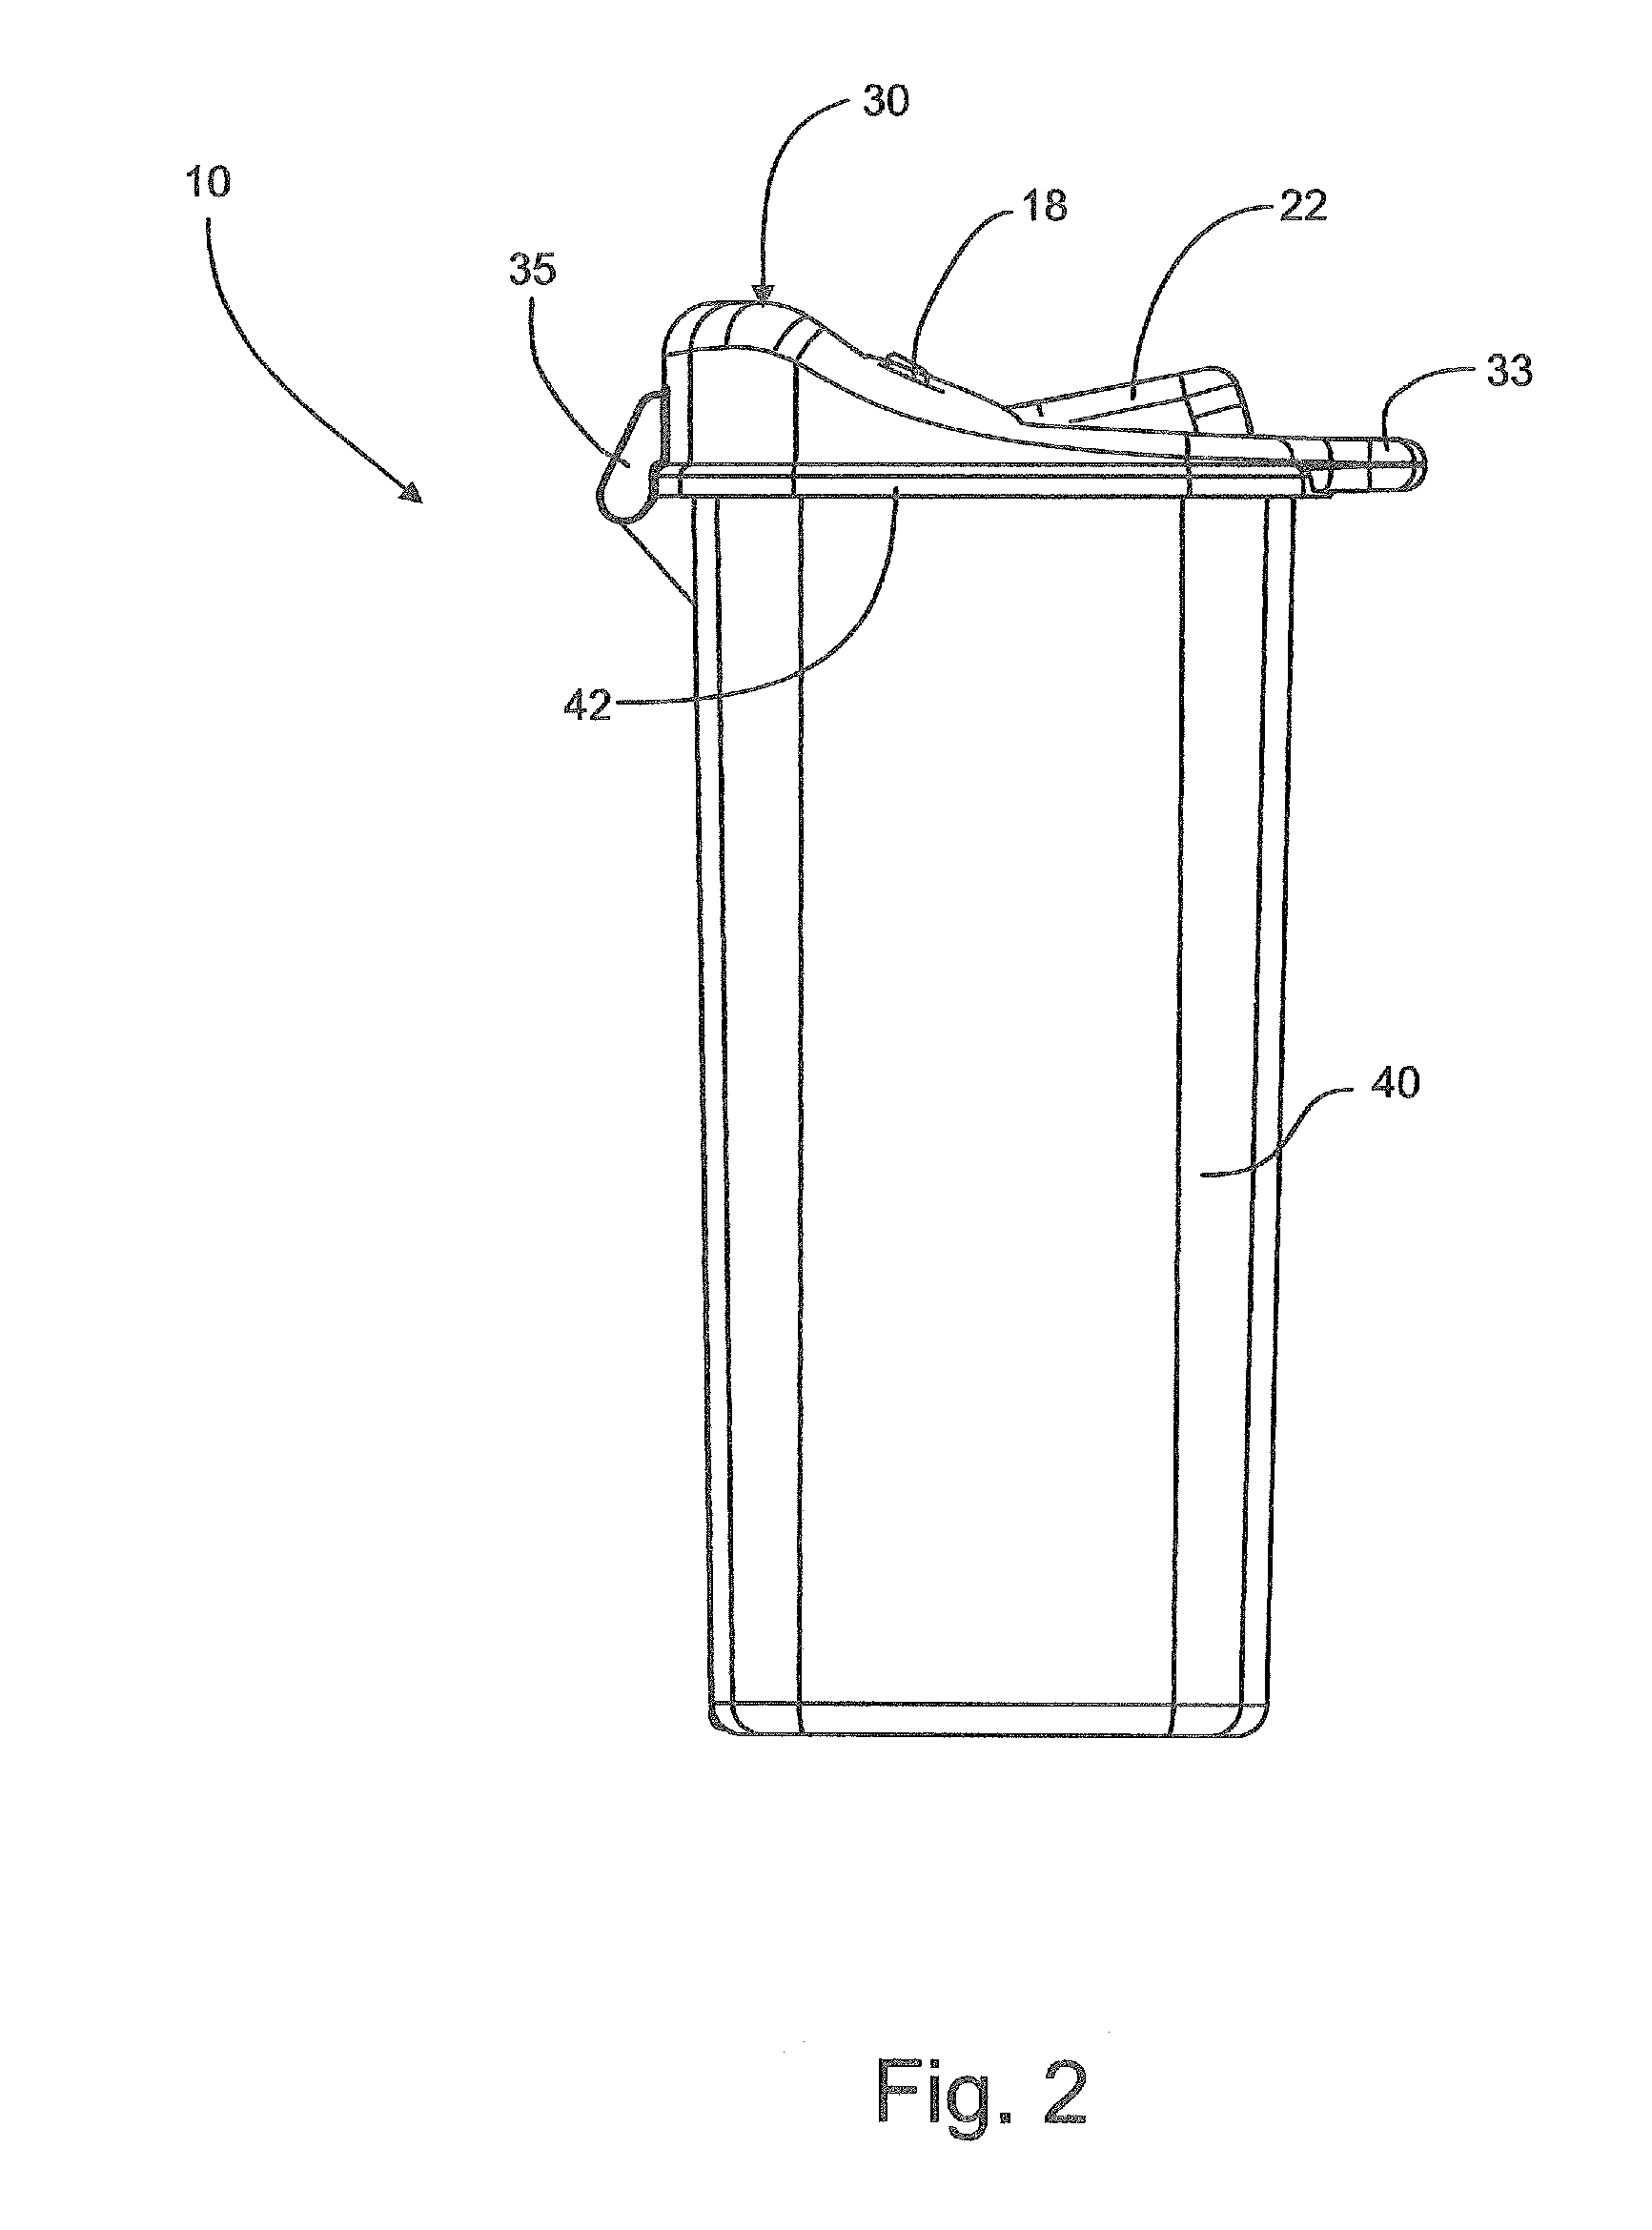 Refuse disposal apparatus and methods of using same